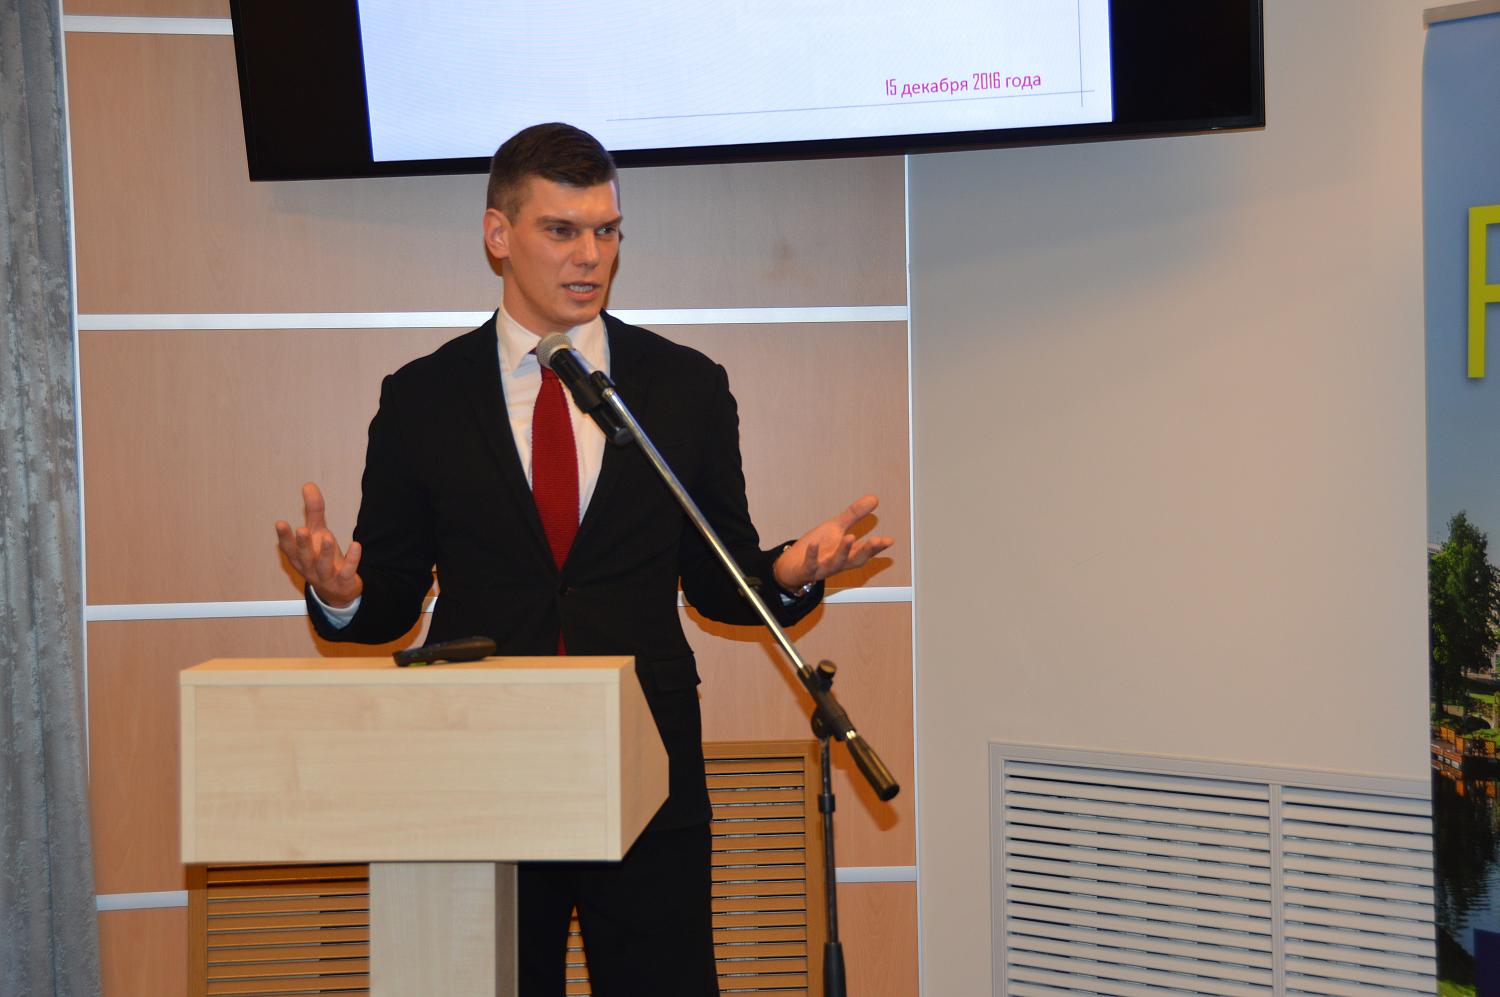 The MCCI conducted a business forum dedicated to the 15th anniversary of the partnership between Moscow and Riga